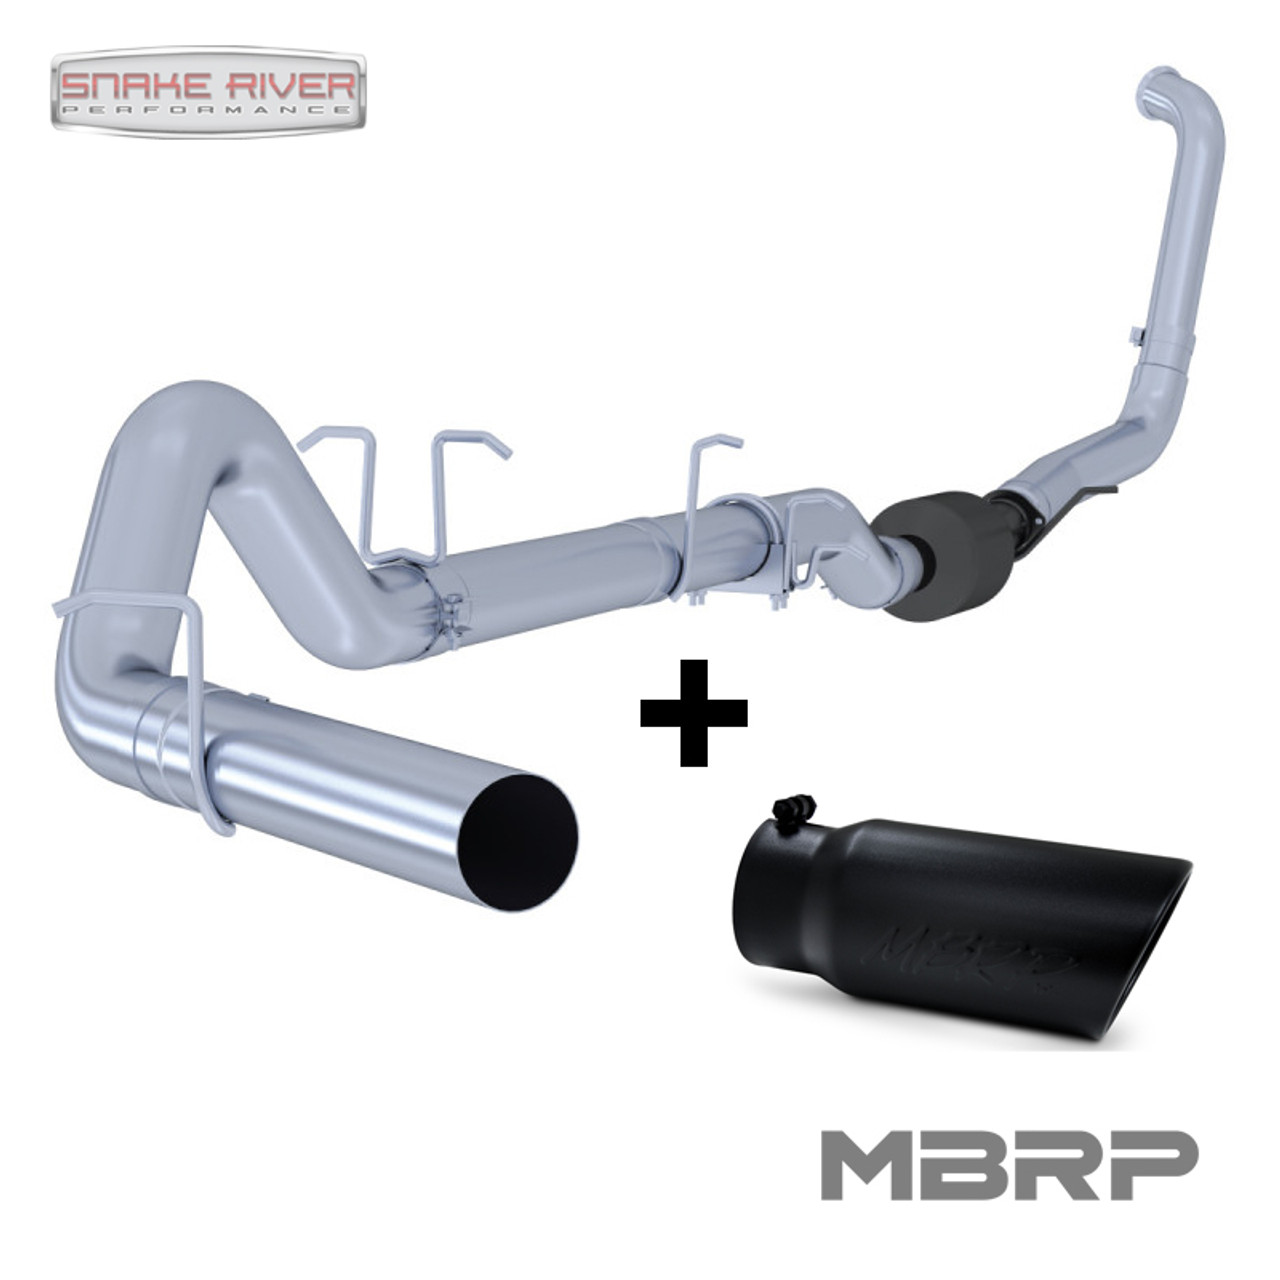 MBRP 4" STAINLESS STEEL EXHAUST 03-07 FORD DIESEL 6.0L NO MUFFLER WITH BLACK TIP - S6212SLM T5051BLK